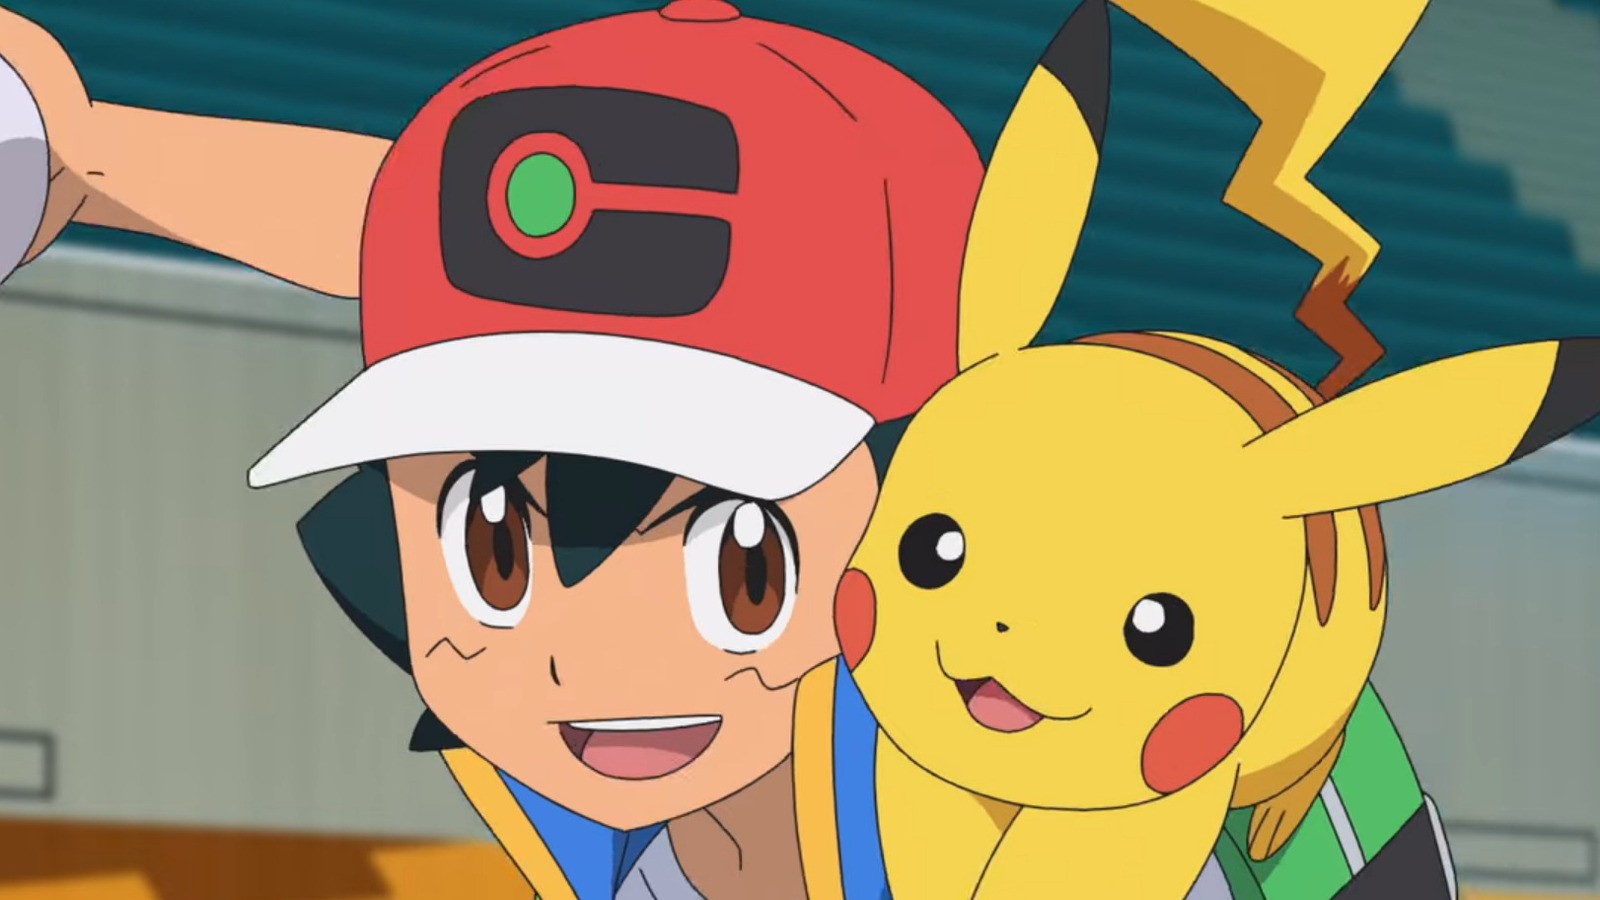 The iconic duo of Ash and Pikachu